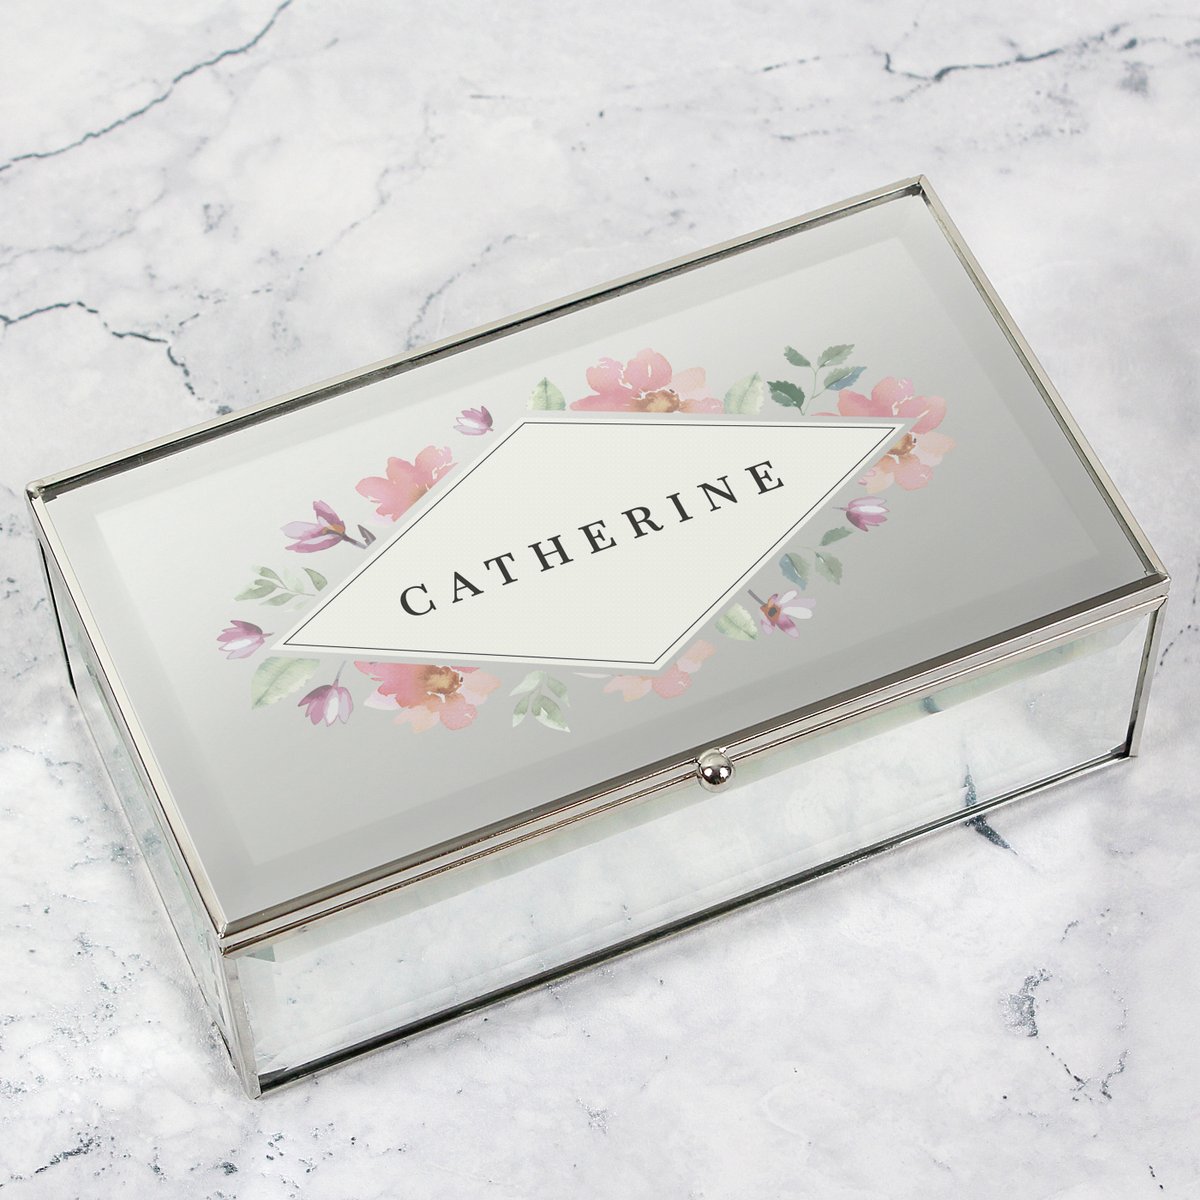 Pretty yet practical, this glass jewellery box is fully lined & can be personalised with any name lilyblueuk.co.uk/personalised-w…

#giftideas #personalised #jewellerybox #shopsmall #shopindine #mhhsbd #EarlyBiz